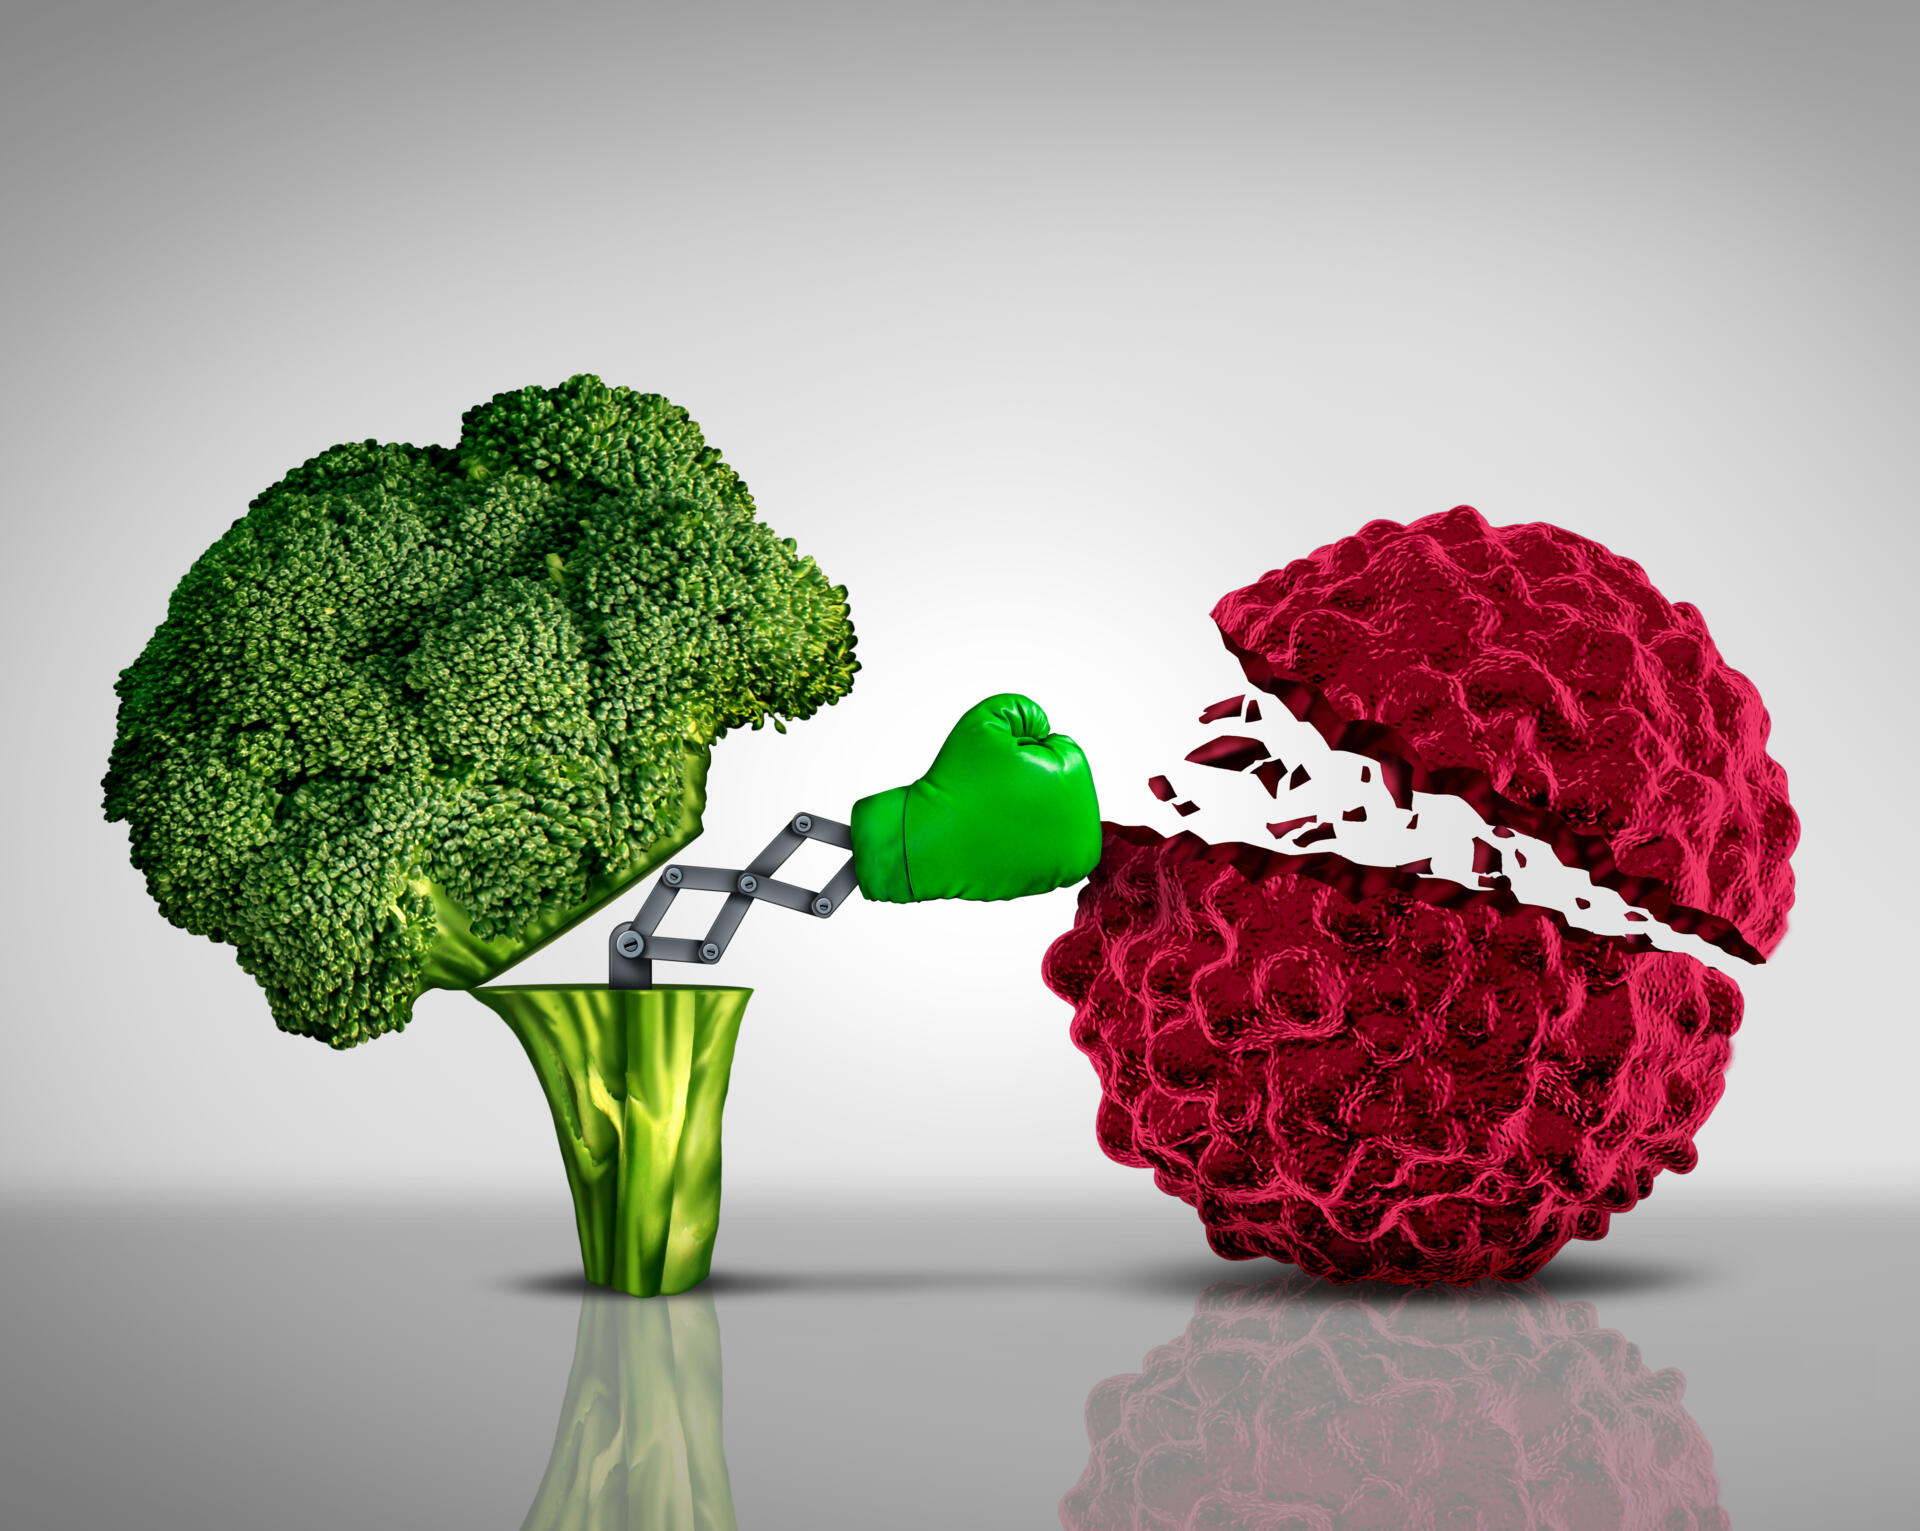 Health food and Cancer fighting foods nutrition concept with a green boxing glove emerging out of an open broccoli vegetable as a health care metaphor for a healthy lifestyle diet rich in natural fruit and vegetables to attack tumors and fight illness.